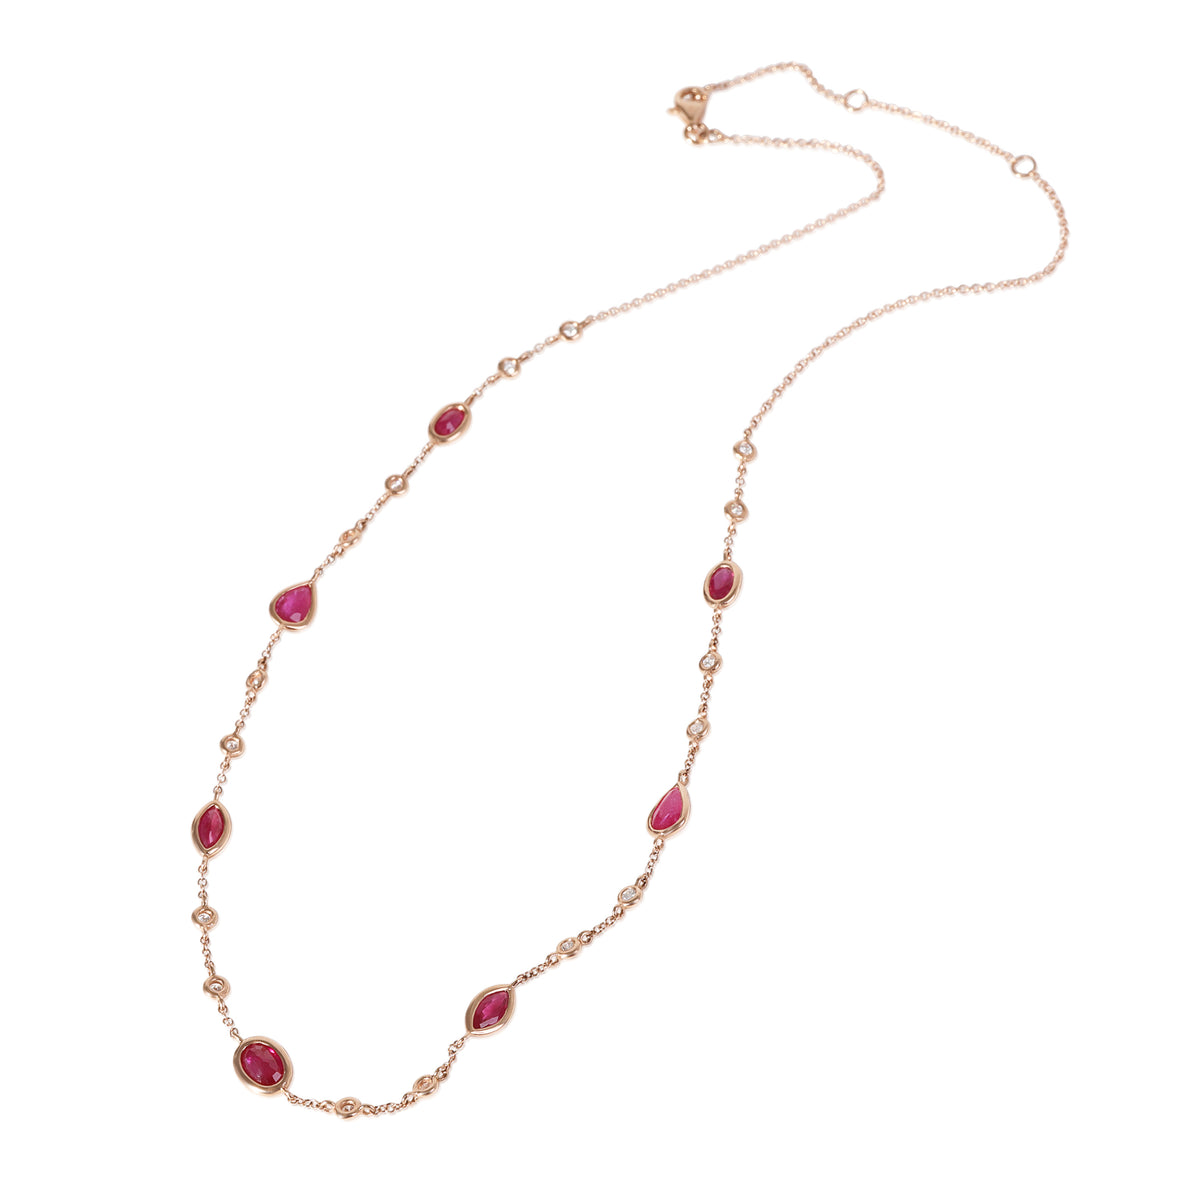 Ruby Diamond Station Necklace in 14k Rose Gold 0.15 CTW